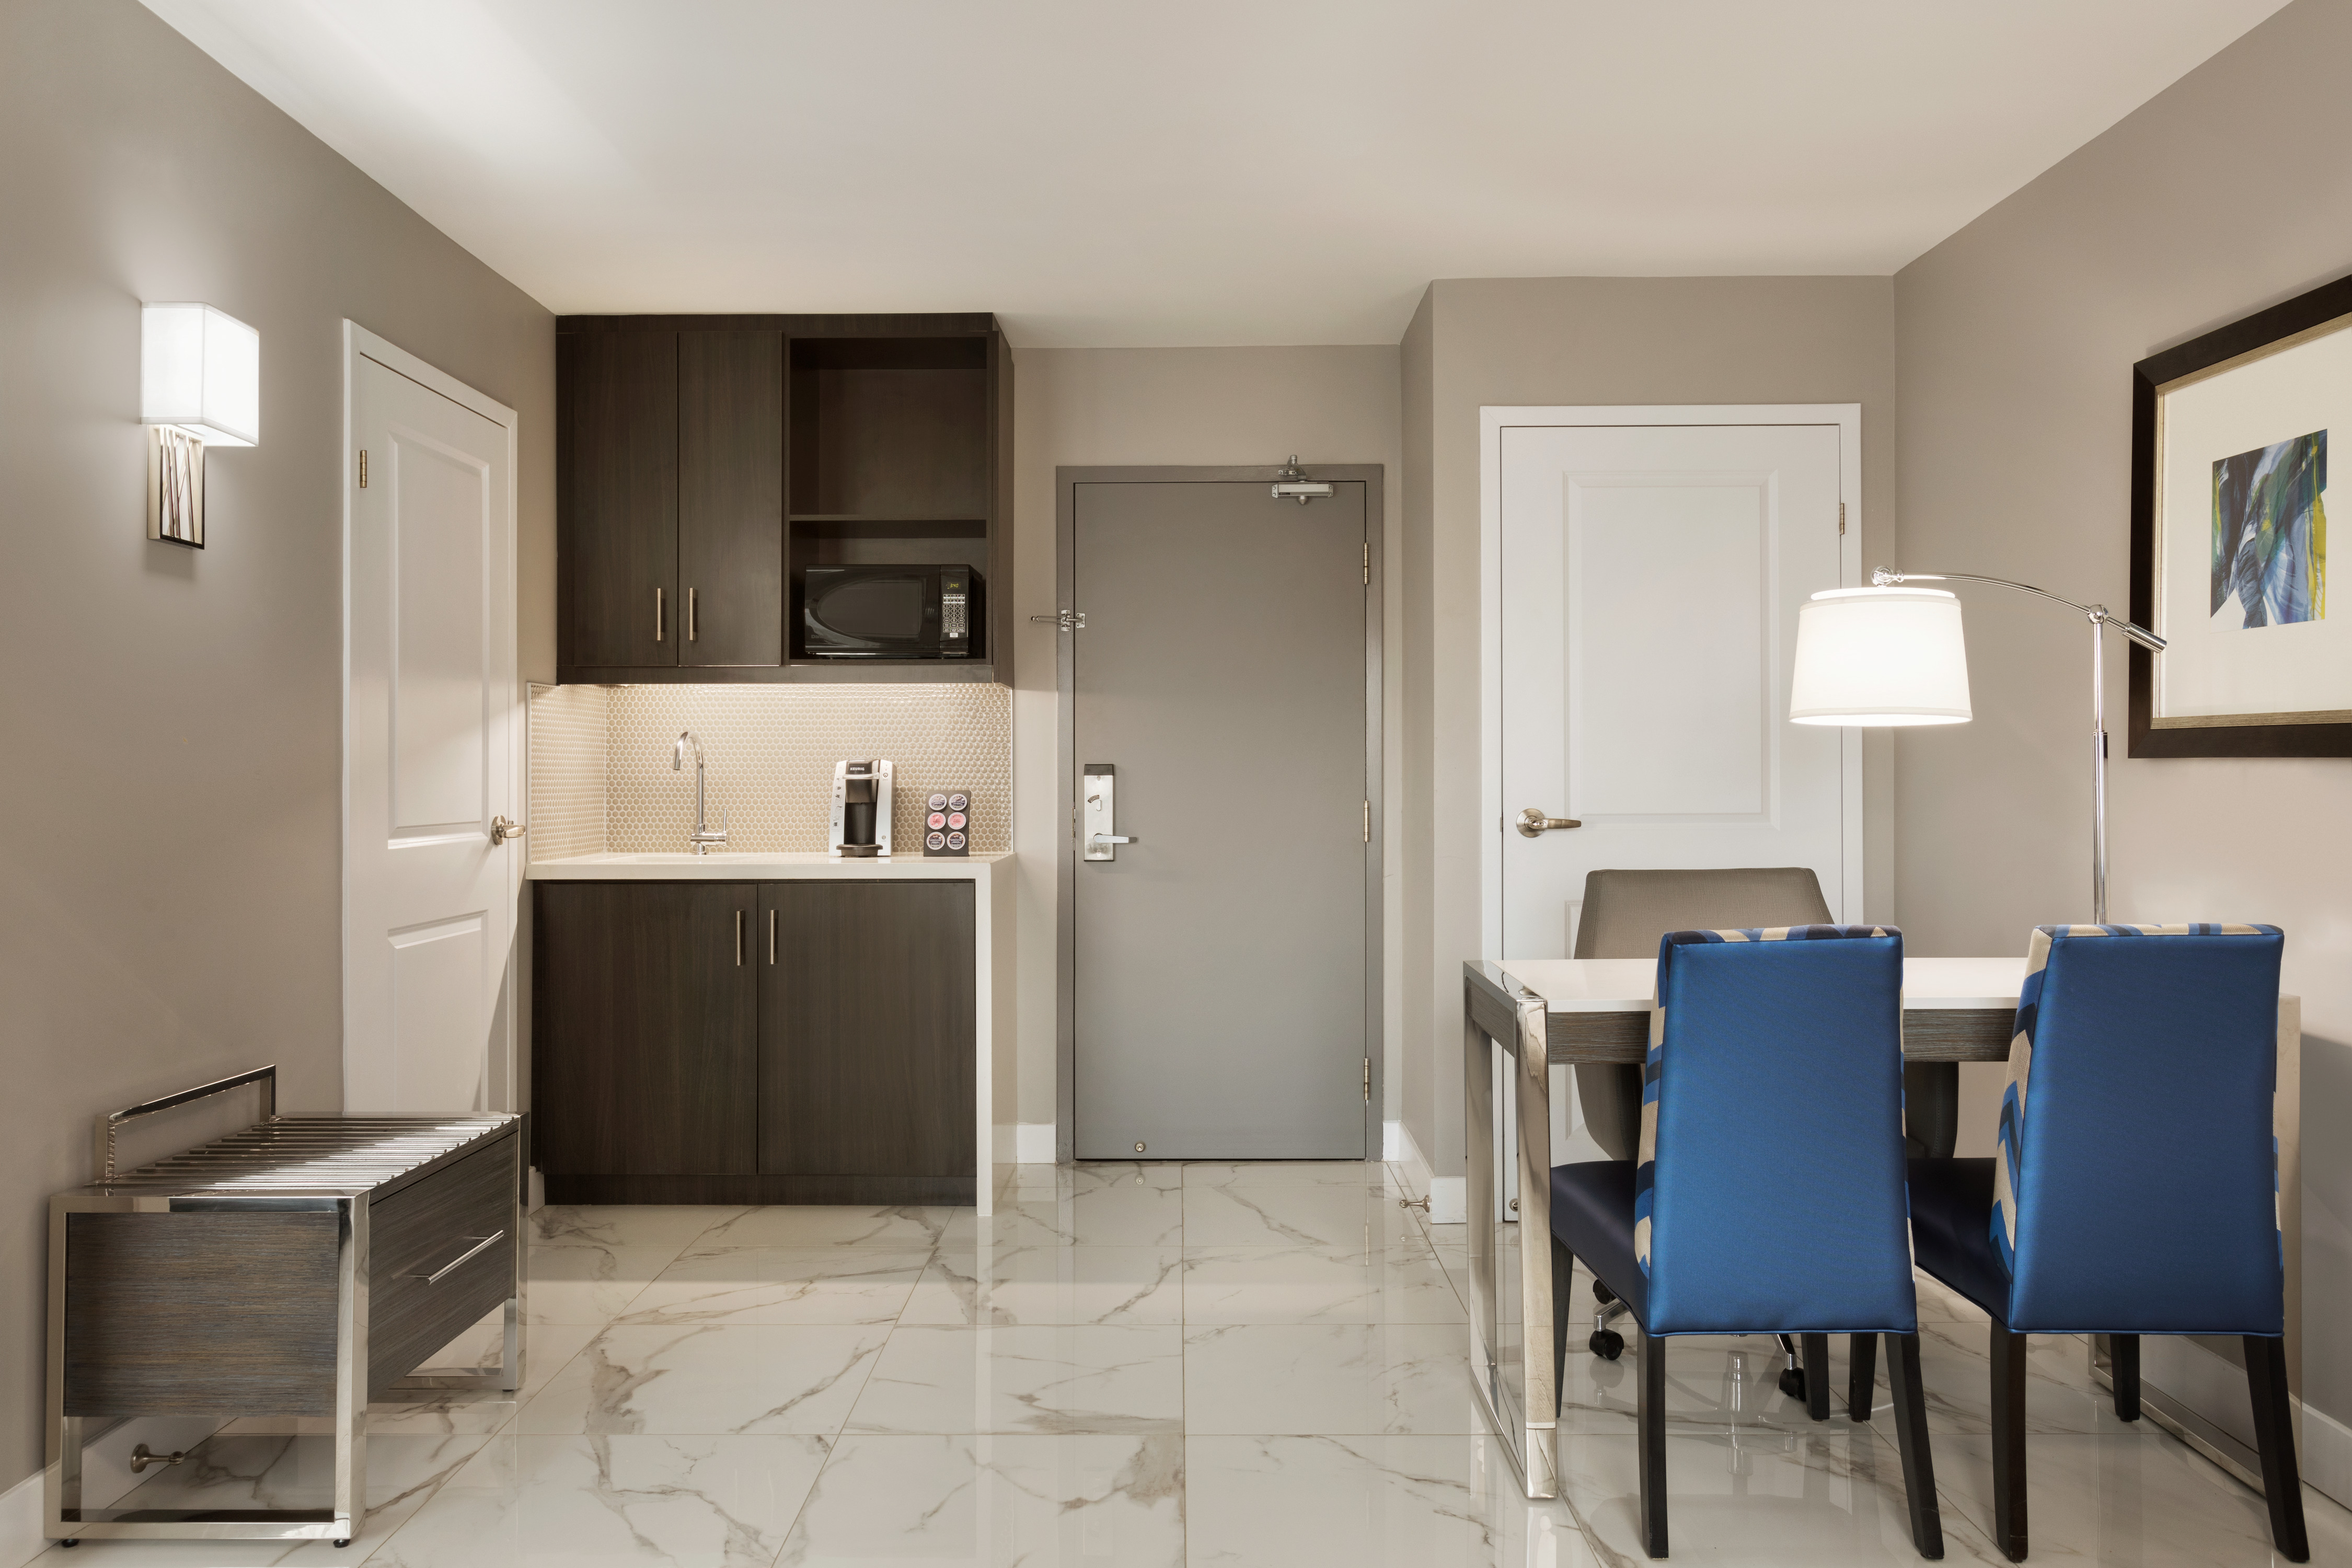 Accessible Guestroom with Entrance, Table and Chairs, and Wet Bar Kitchen Area